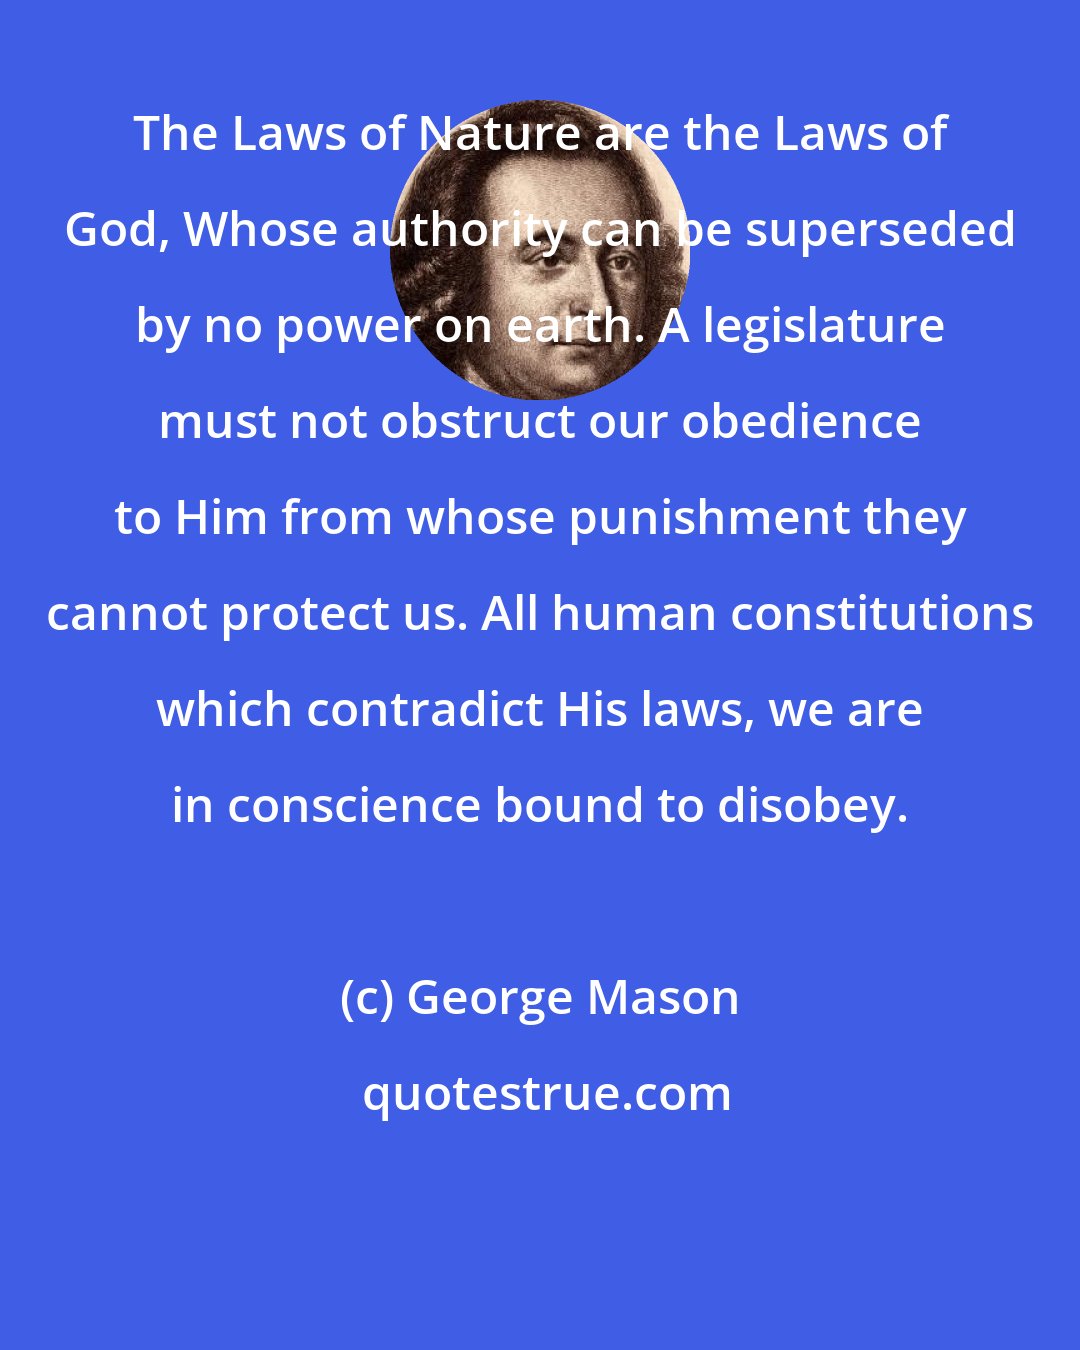 George Mason: The Laws of Nature are the Laws of God, Whose authority can be superseded by no power on earth. A legislature must not obstruct our obedience to Him from whose punishment they cannot protect us. All human constitutions which contradict His laws, we are in conscience bound to disobey.